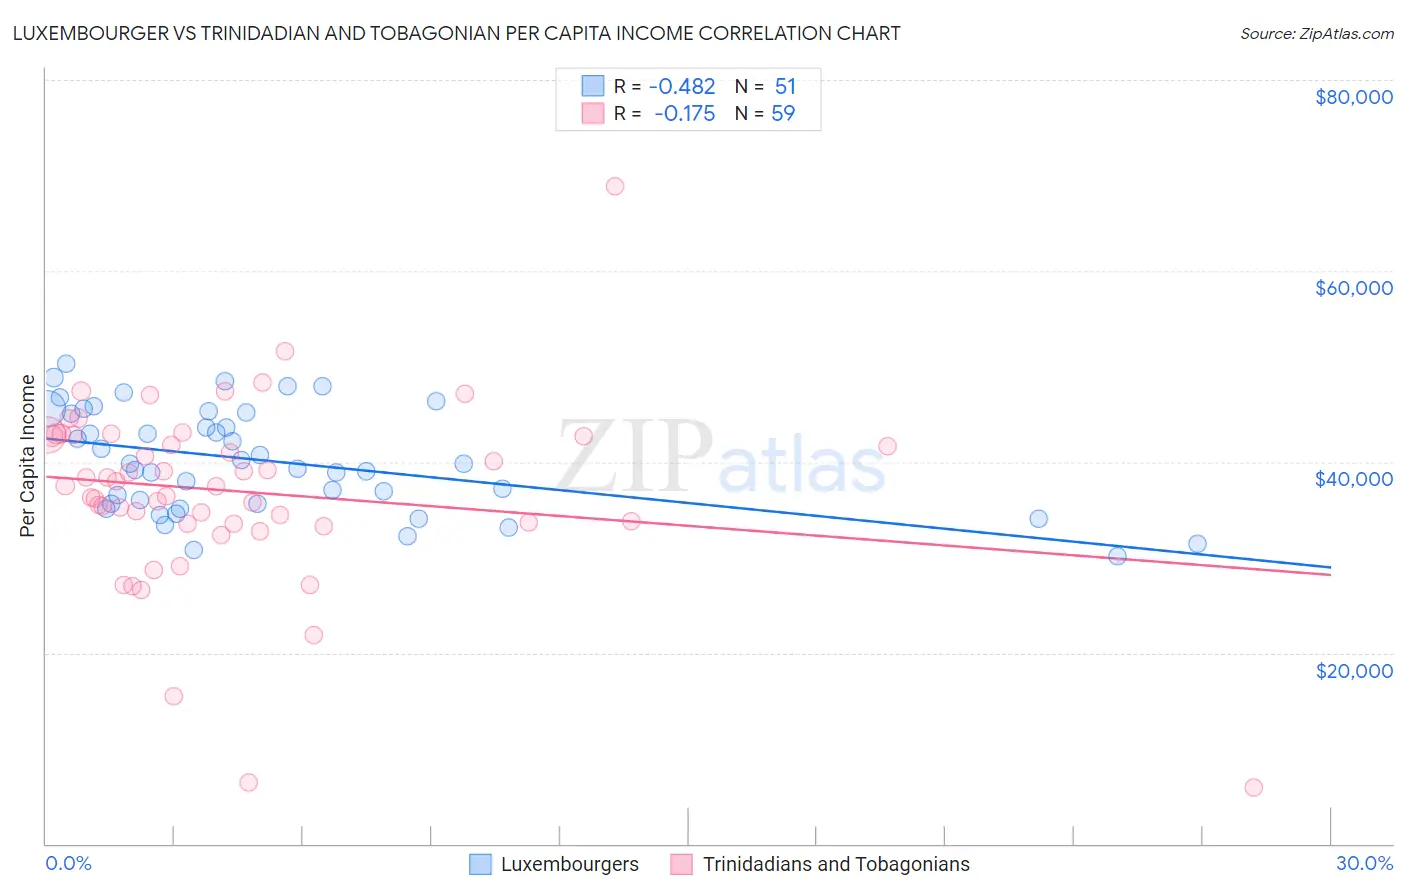 Luxembourger vs Trinidadian and Tobagonian Per Capita Income